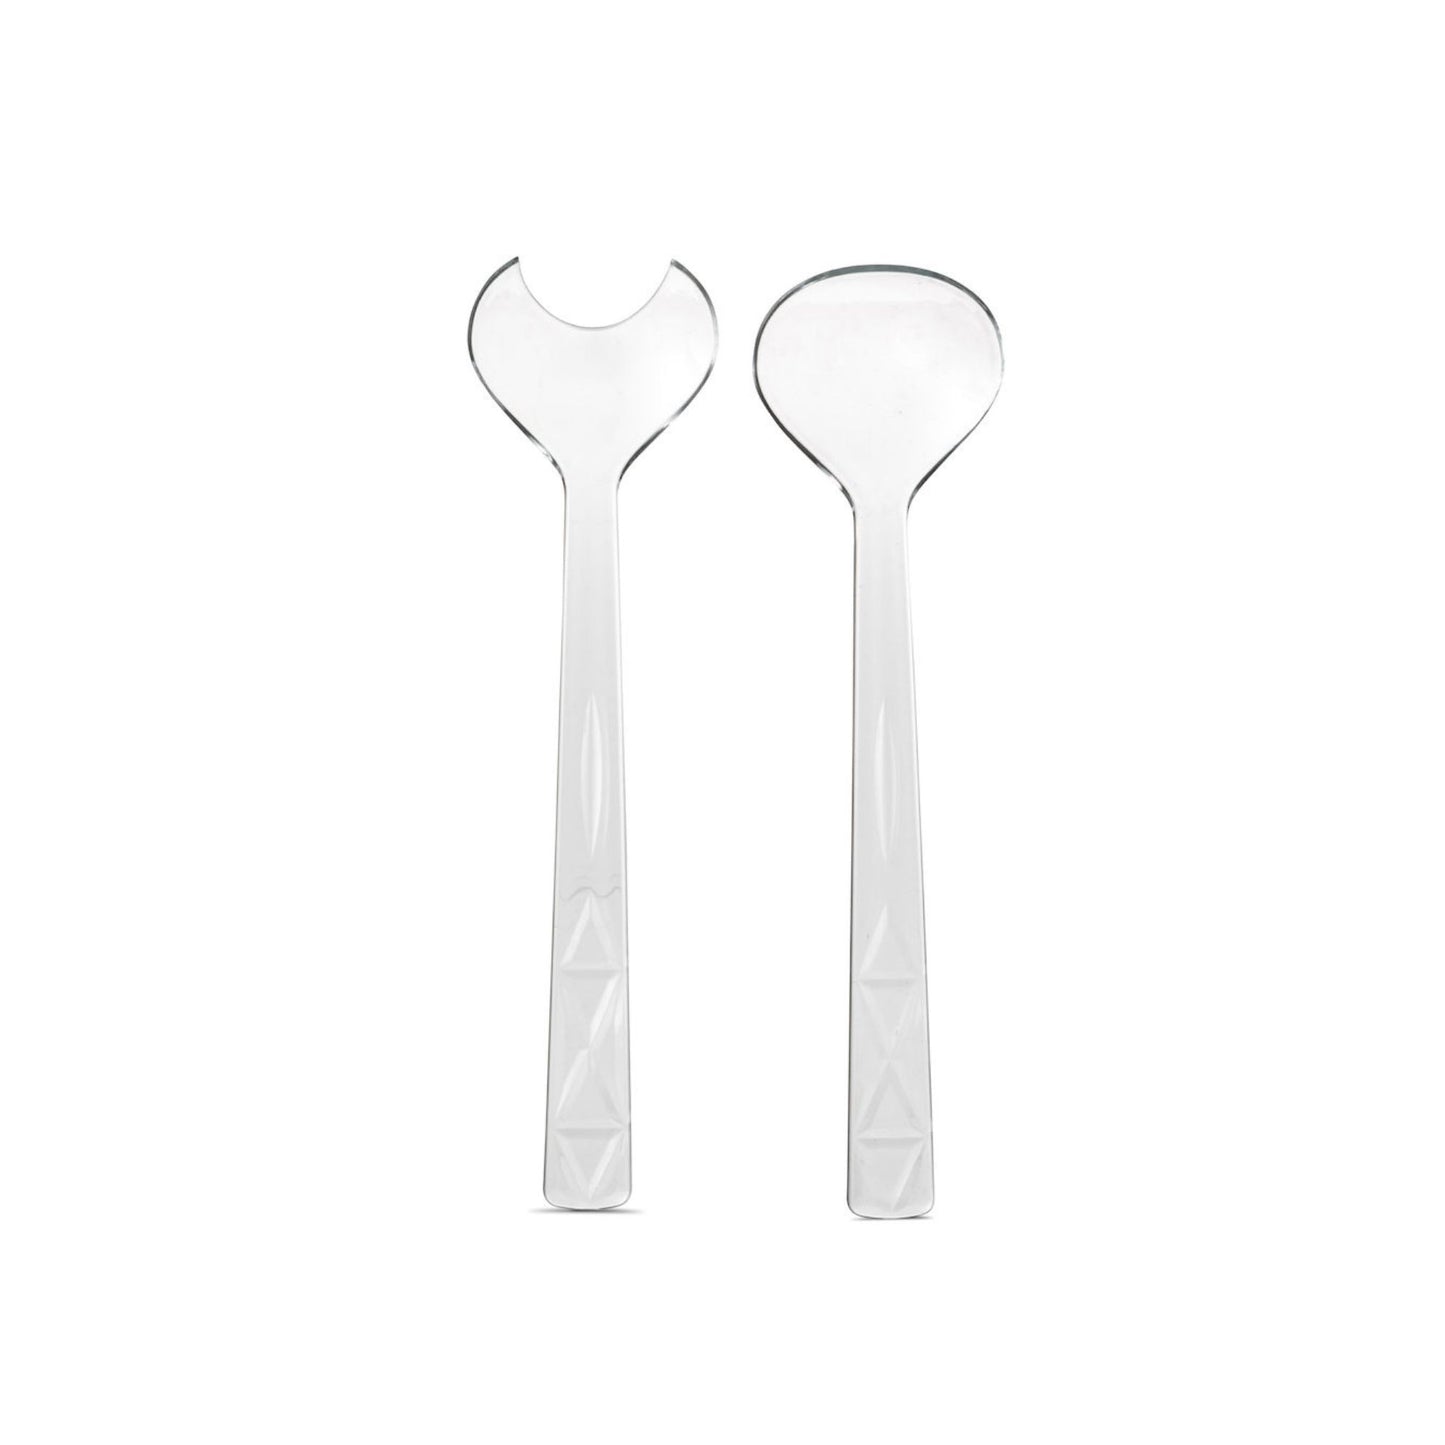 Sagaform by Widgeteer Picnic Outdoor-Party Dinnerware Collection, Acrylic Salad Server, Set of 2